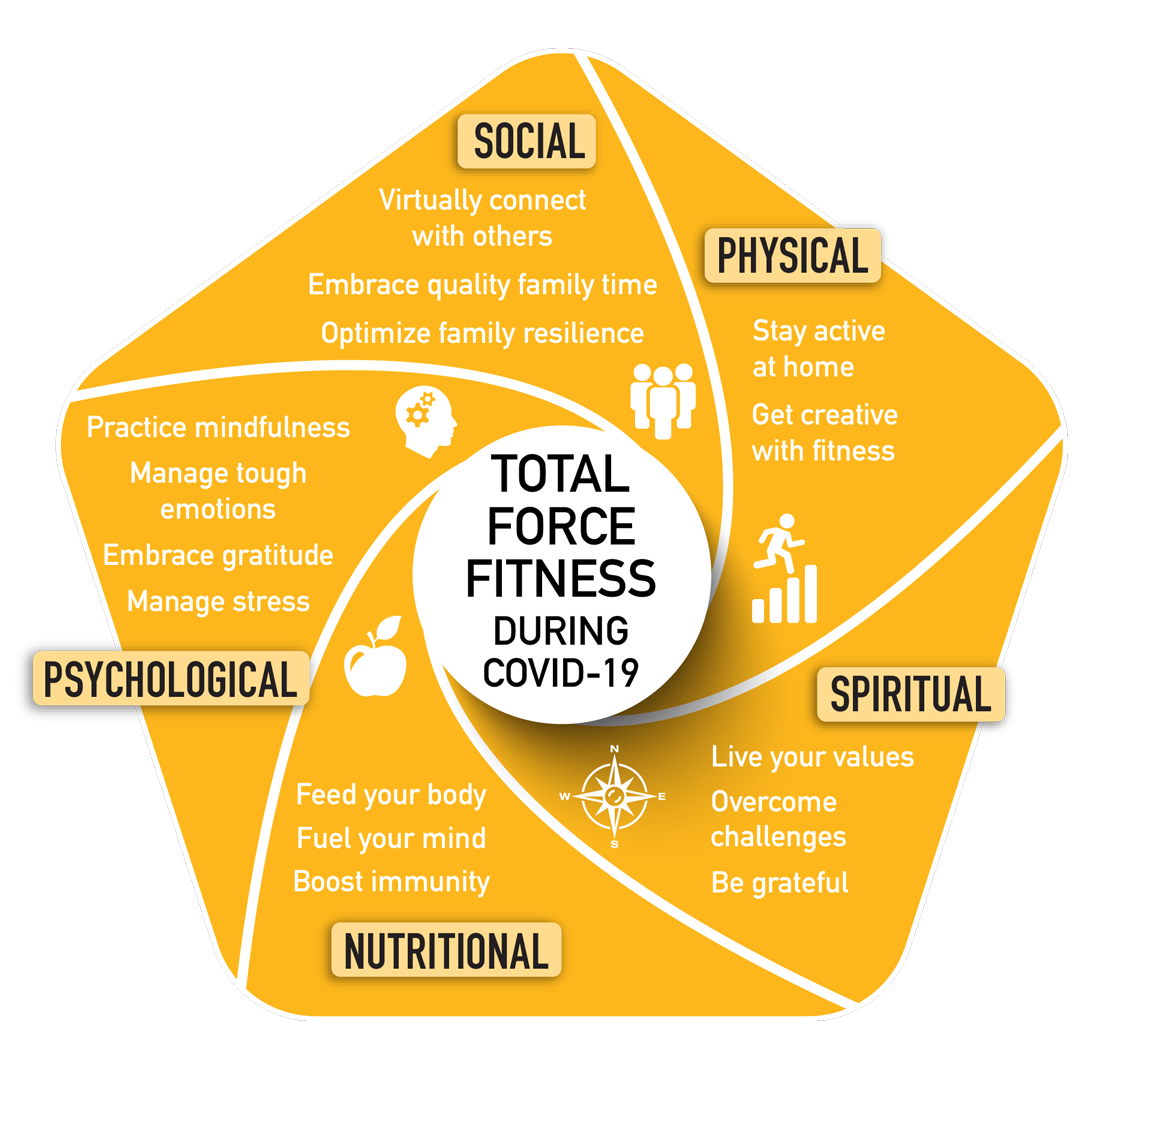 Total Force Fitness during COVID-19: Social – Virtually connect with others. Embrace quality family time. Optimize family resilience. Physical – Stay active at home. Get creative with fitness. Spiritual – Live your values. Overcome challenges. Be grateful. Nutritional – Feed your body. Fuel your mind. Boost immunity. Psychological – Practice mindfulness. Manage tough emotions. Embrace gratitude. Manage stress.